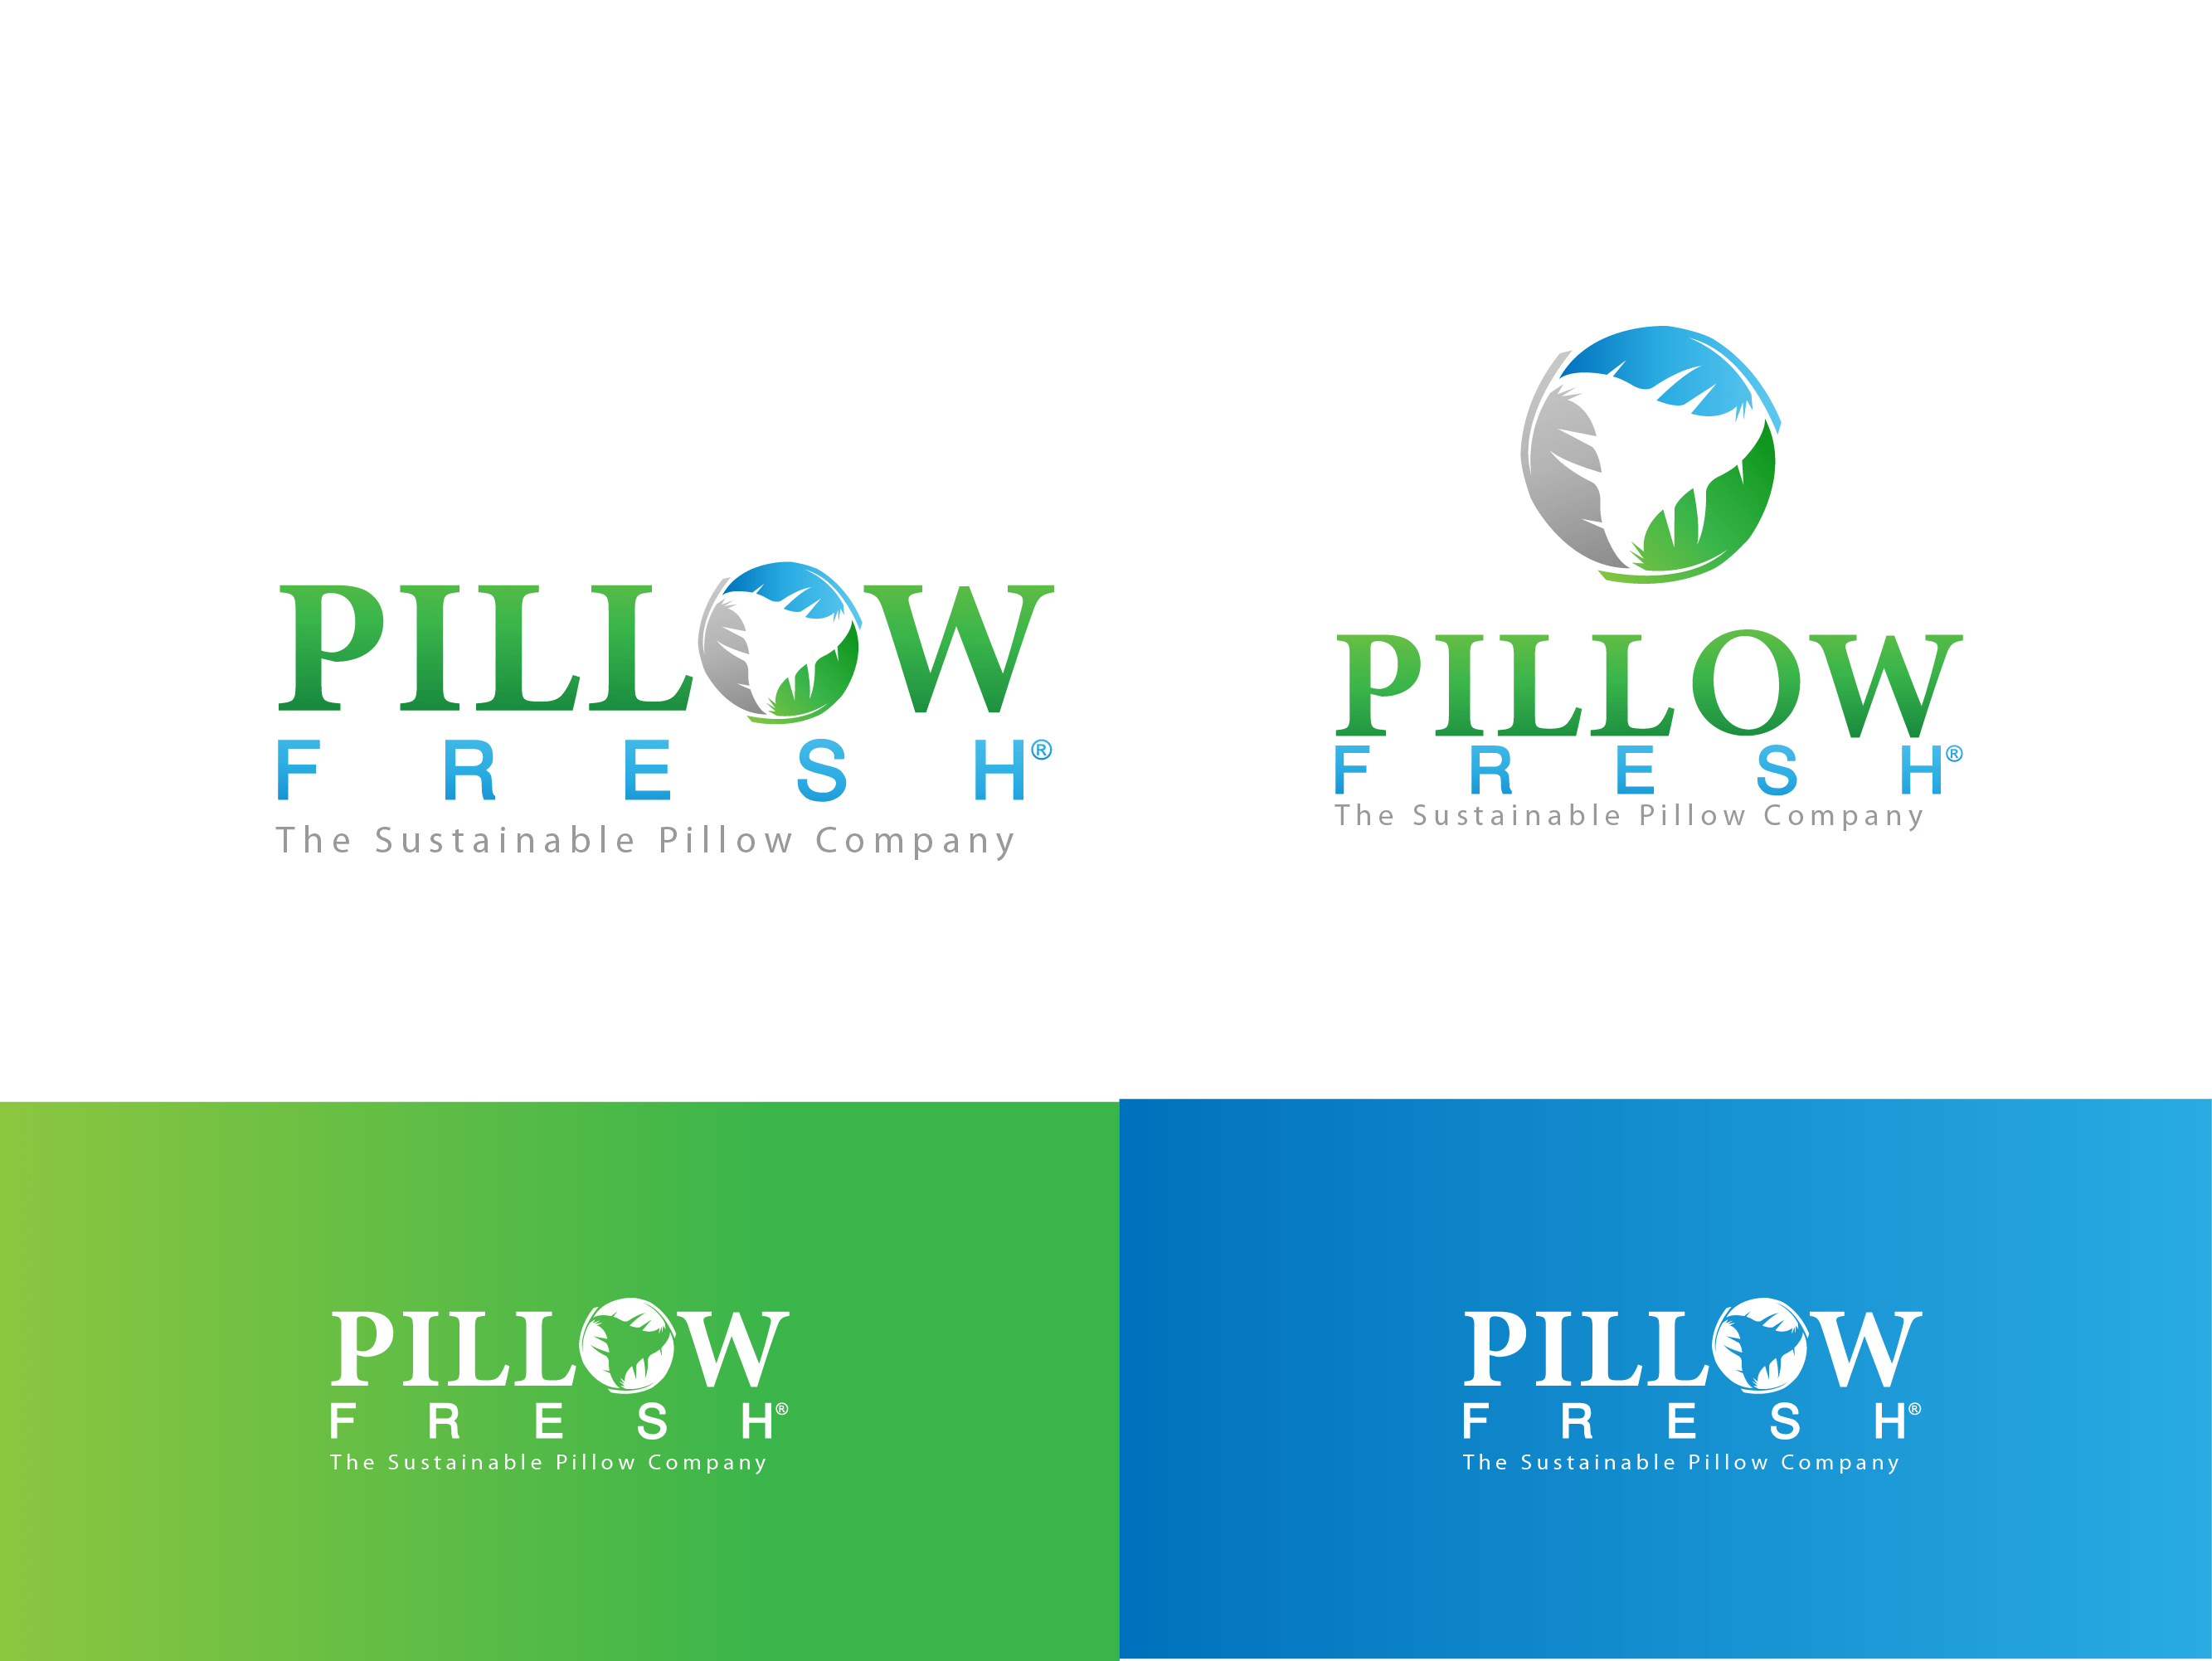 Feather H Logo - Logo with feathers for pillow company. LOGO DESIGN ♡DC. Logo